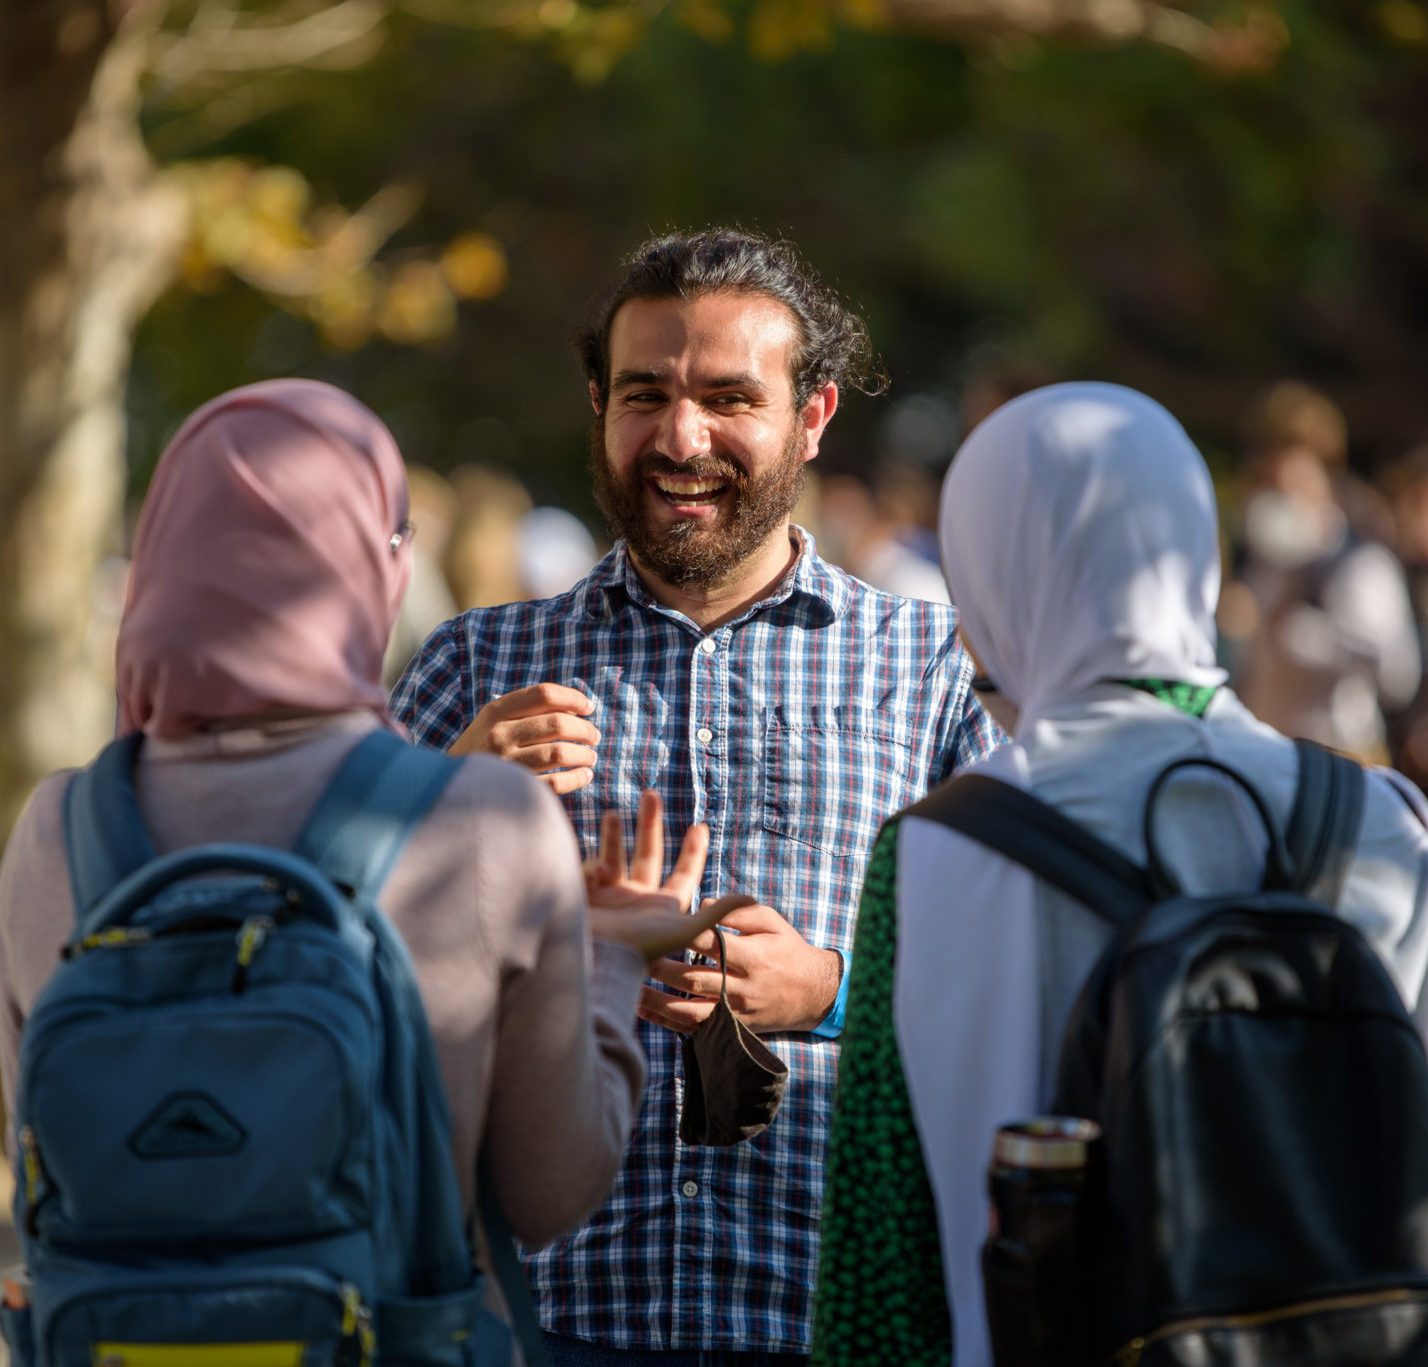 student talking to other students wearing hijabs